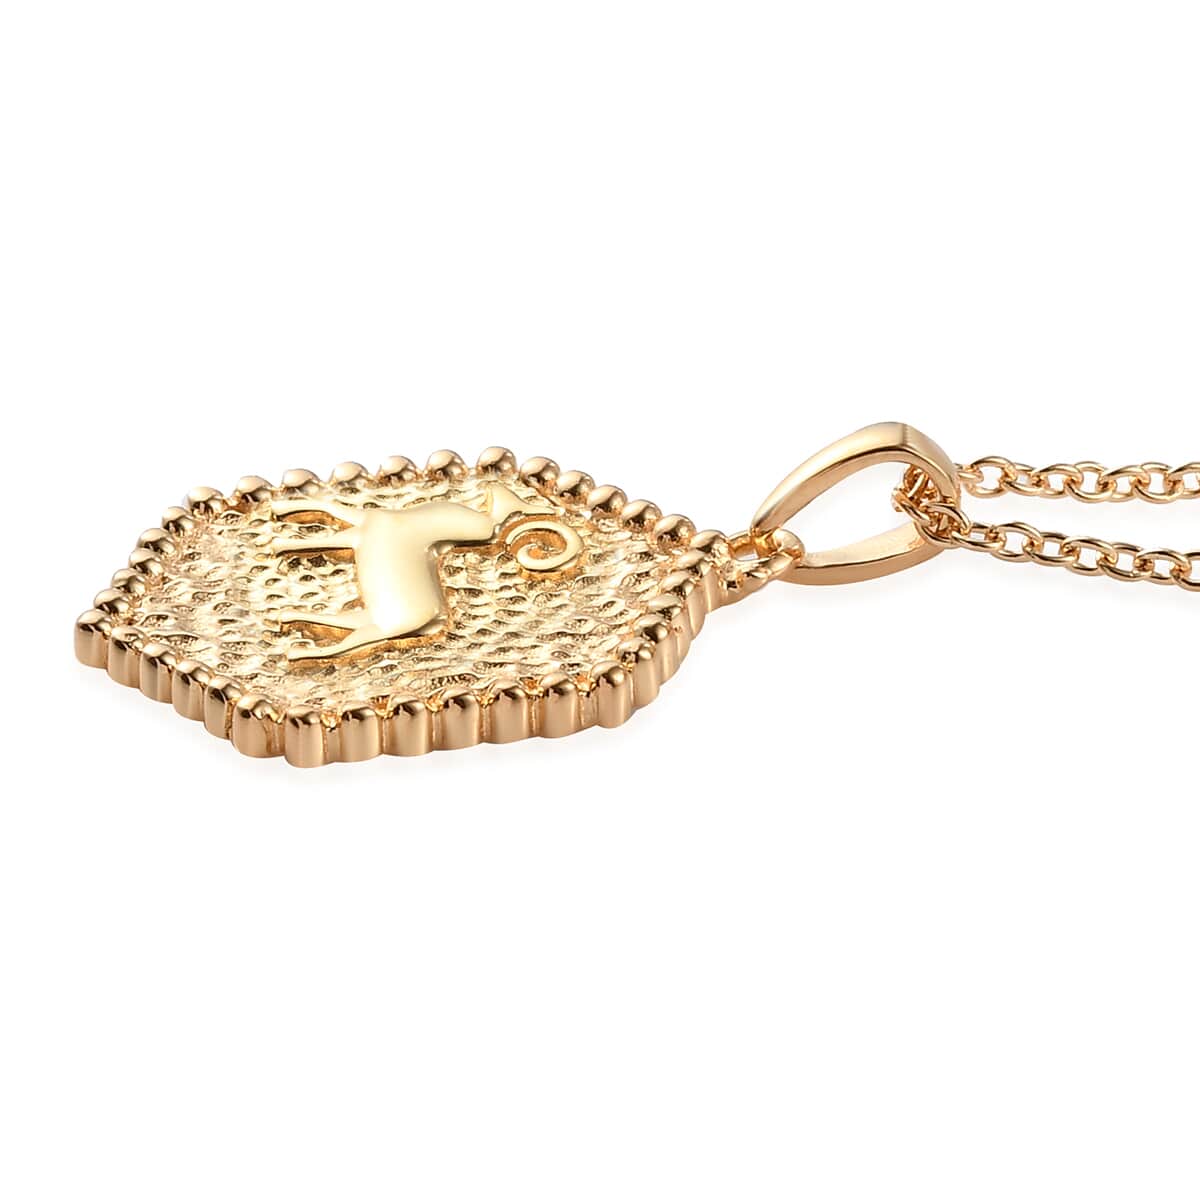 KARIS Aries Zodiac Pendant Necklace 20 Inches in 18K YG Plated and ION Plated Yellow Gold Stainless Steel image number 3